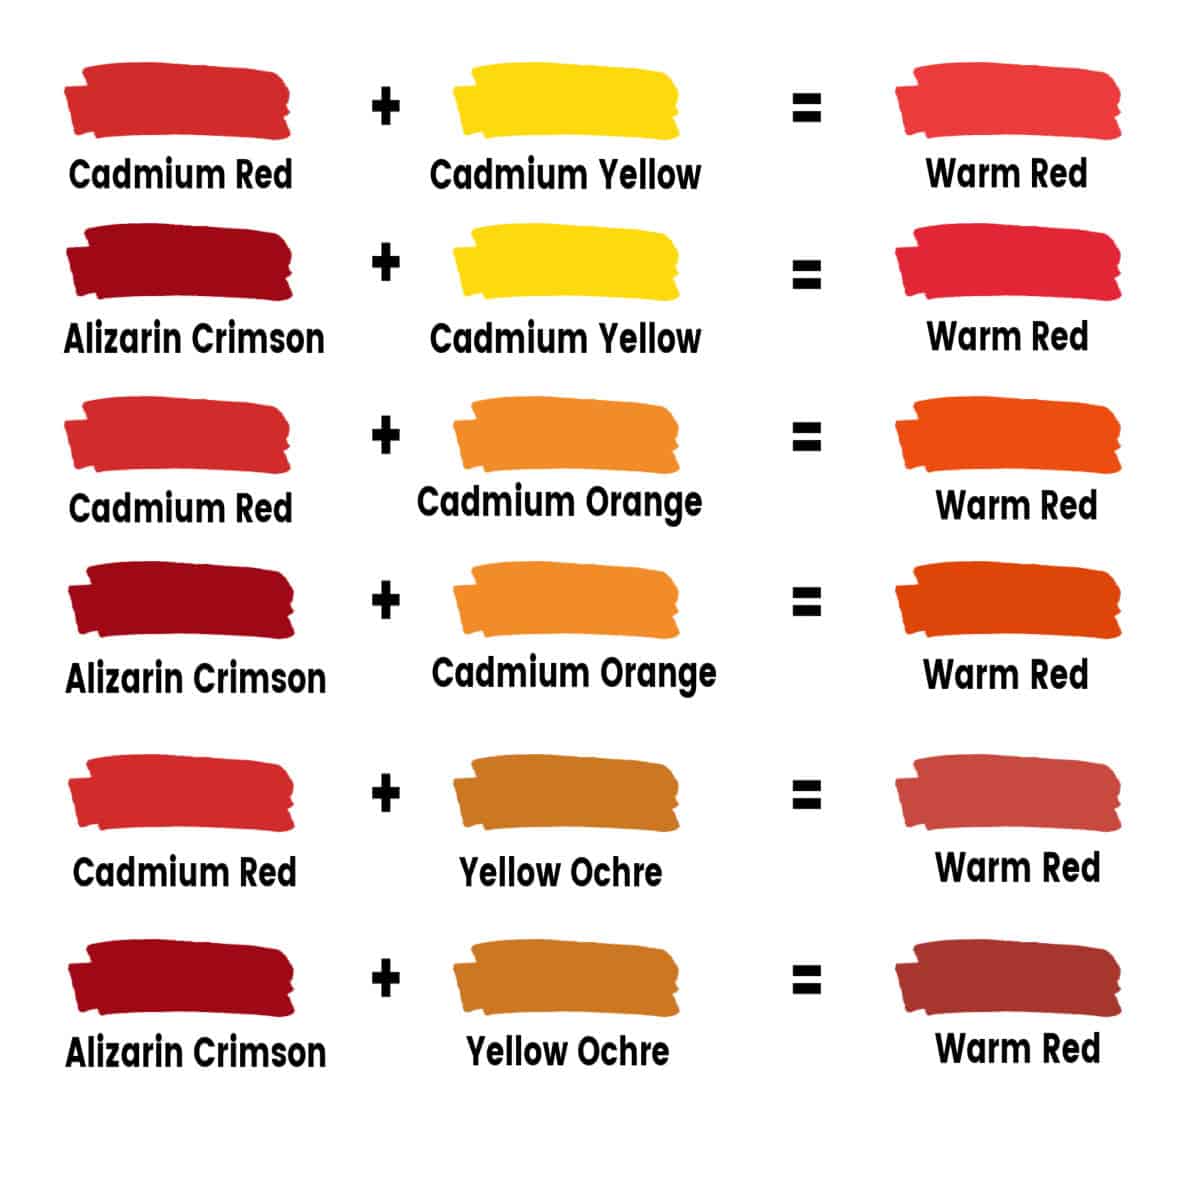 Color mixing chart showing how to mix warm red paint.